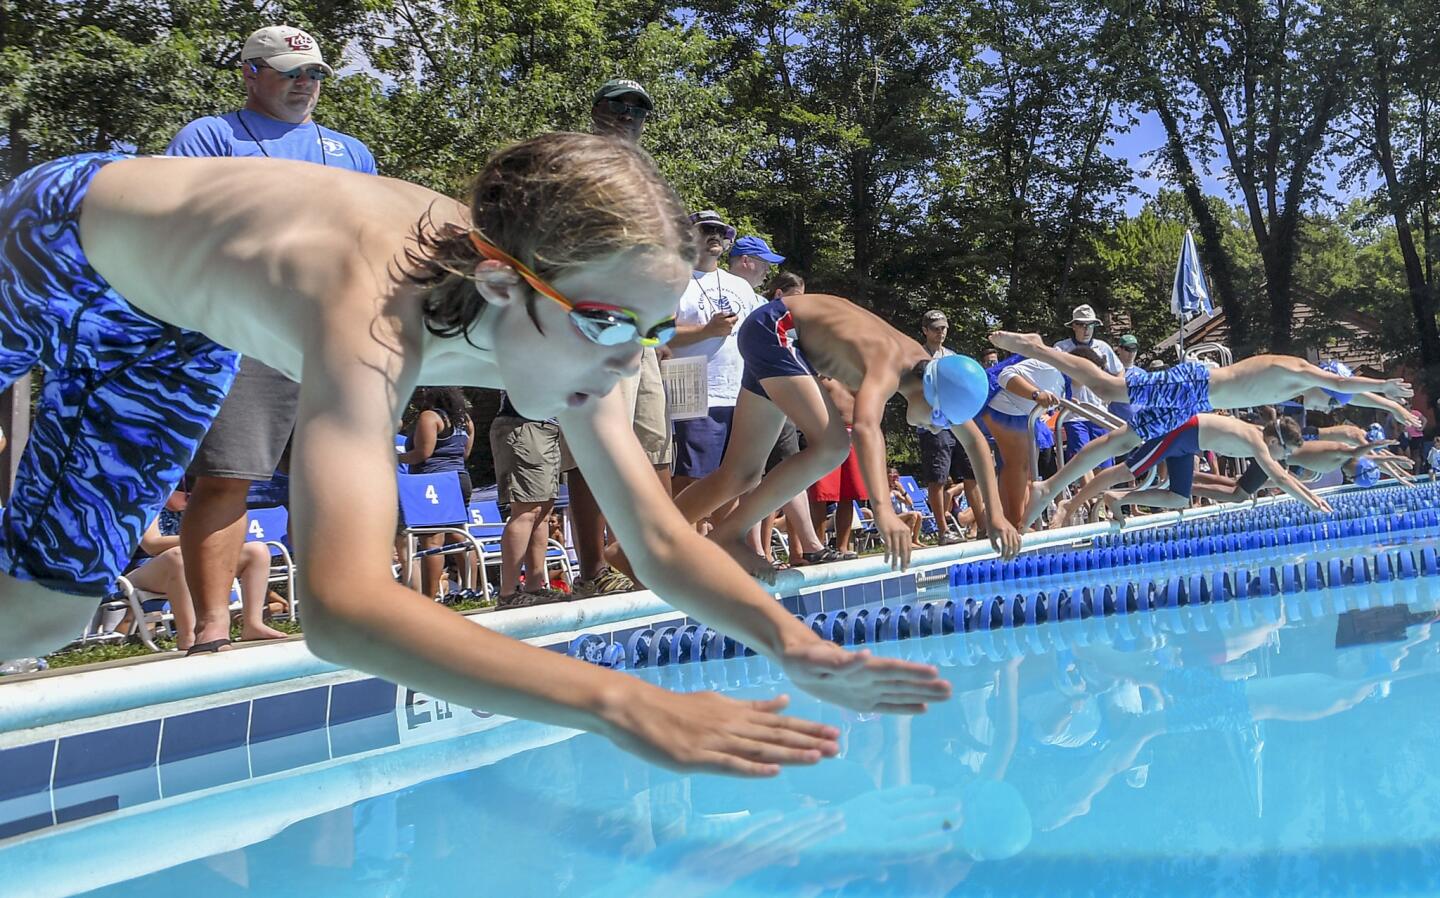 Clemens Crossing's Cedrick Hotopp is off at the start of the boys 11-12 50 yard breaststroke event during the Columbia Neighborhood Swim League meet between host Clemens Crossing and Harper's Choice Saturday morning in Columbia.